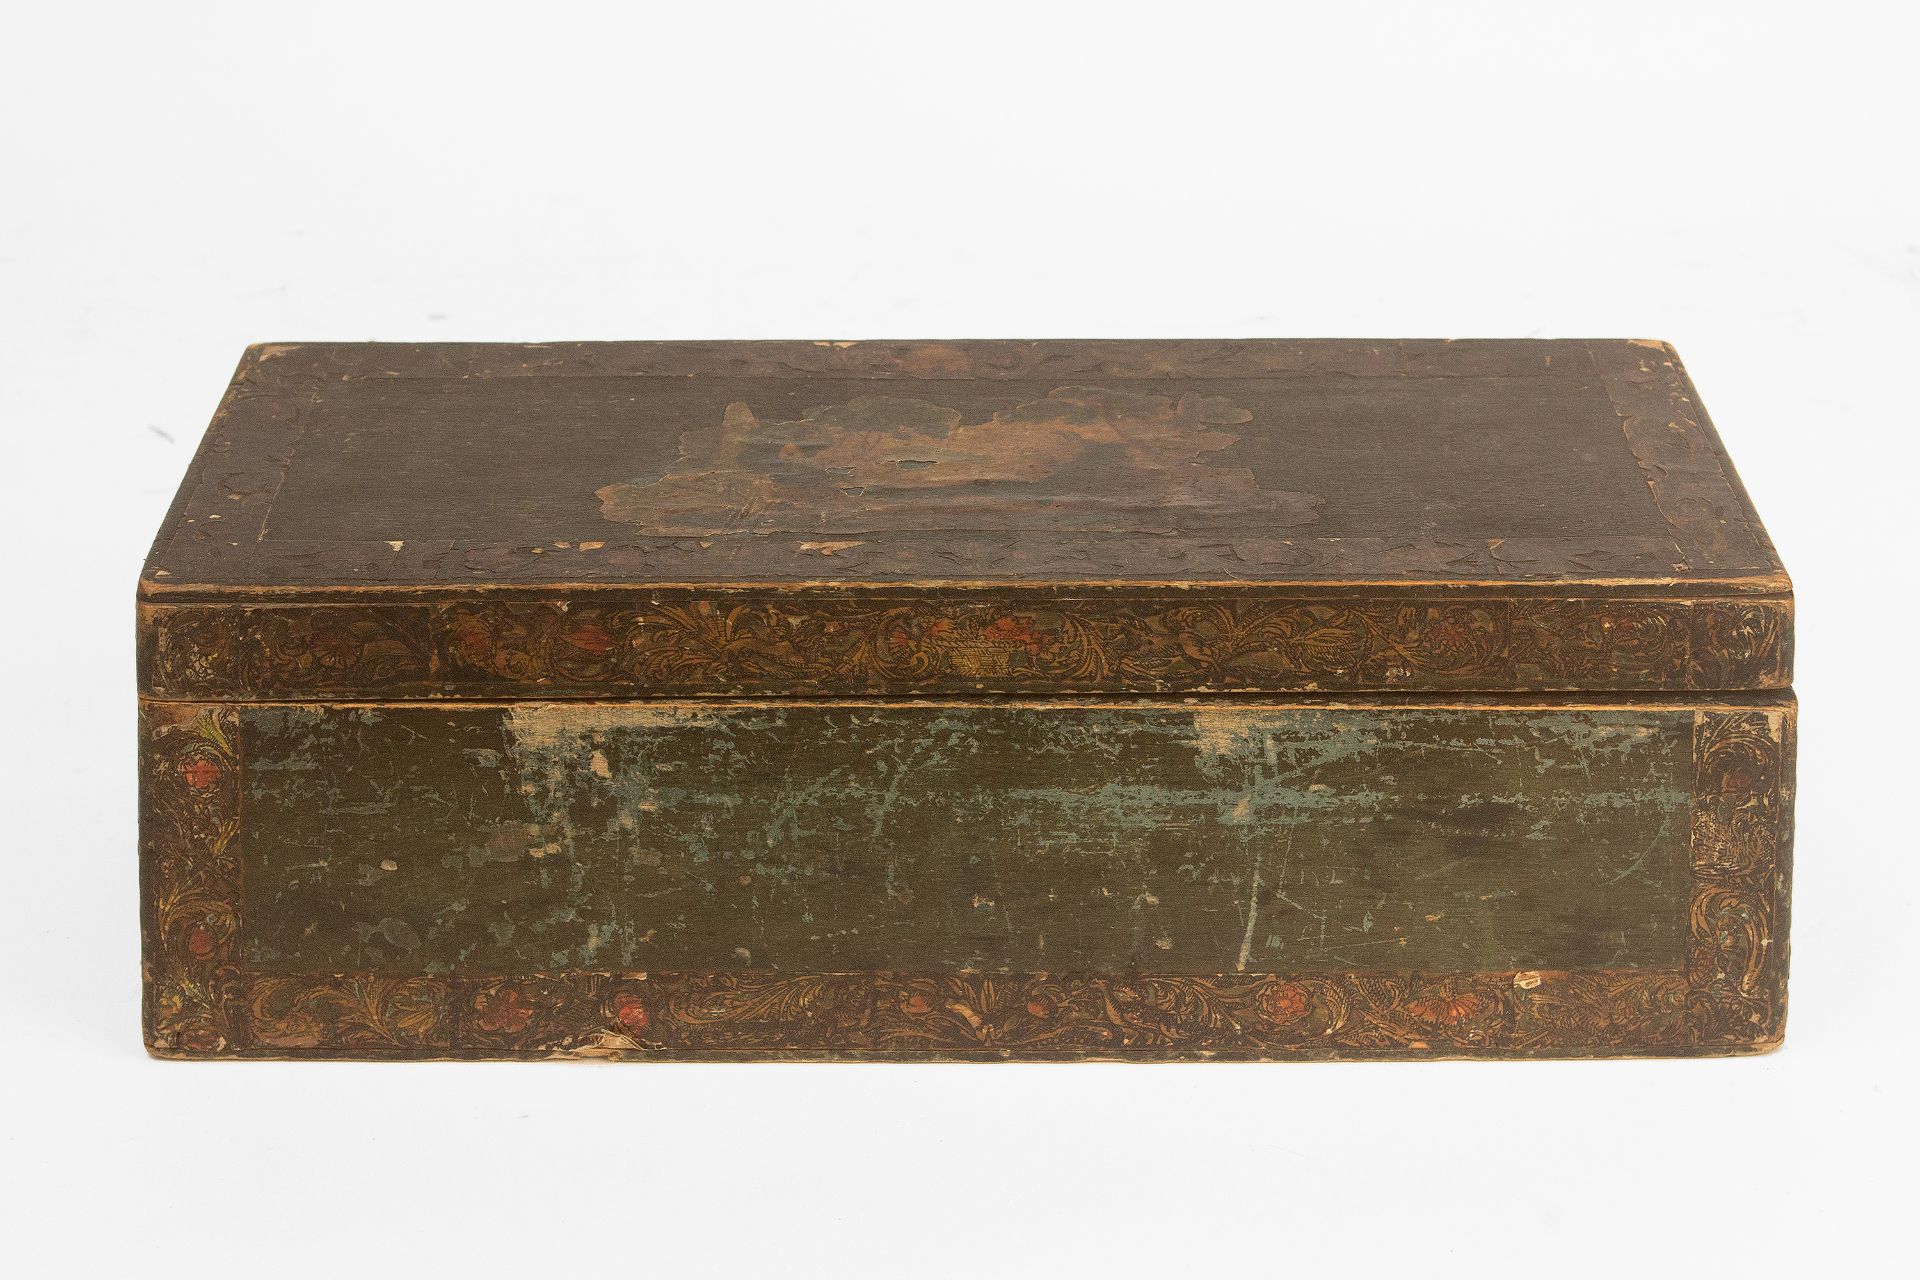 A pair of 19th century lacca povera style European boxes - Image 2 of 6